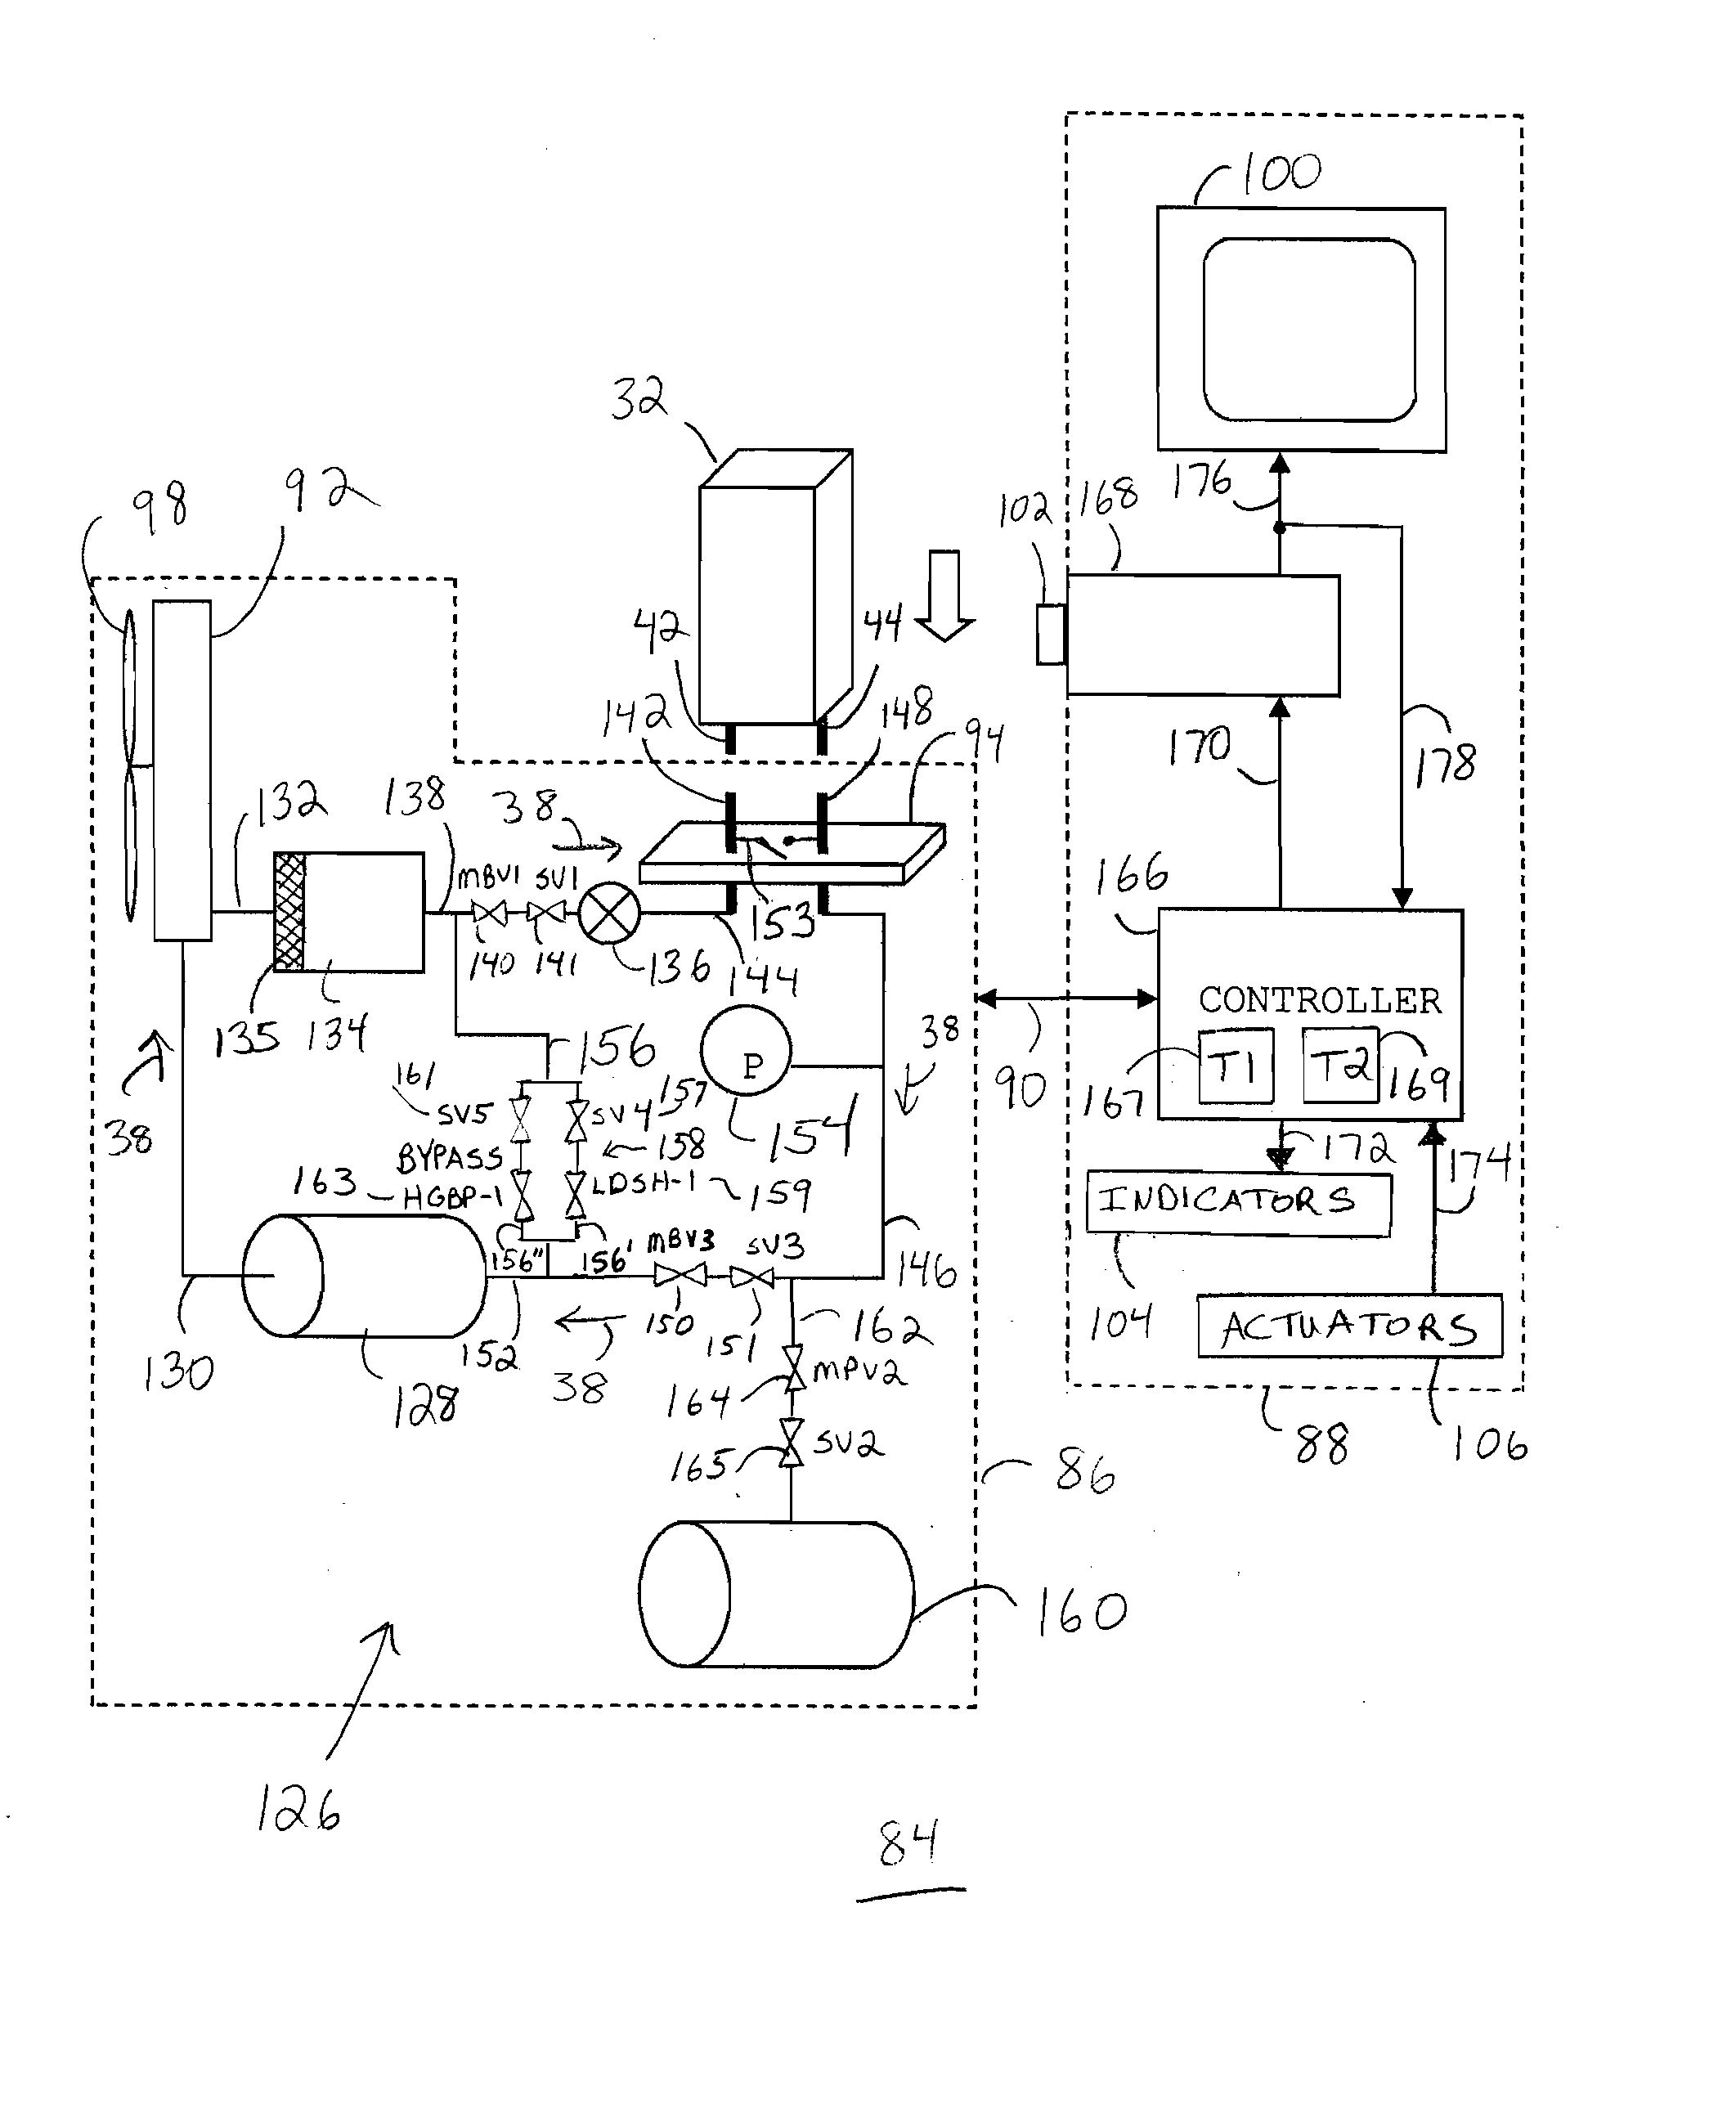 Method and system for evaluating fluid flow through a heat exchanger